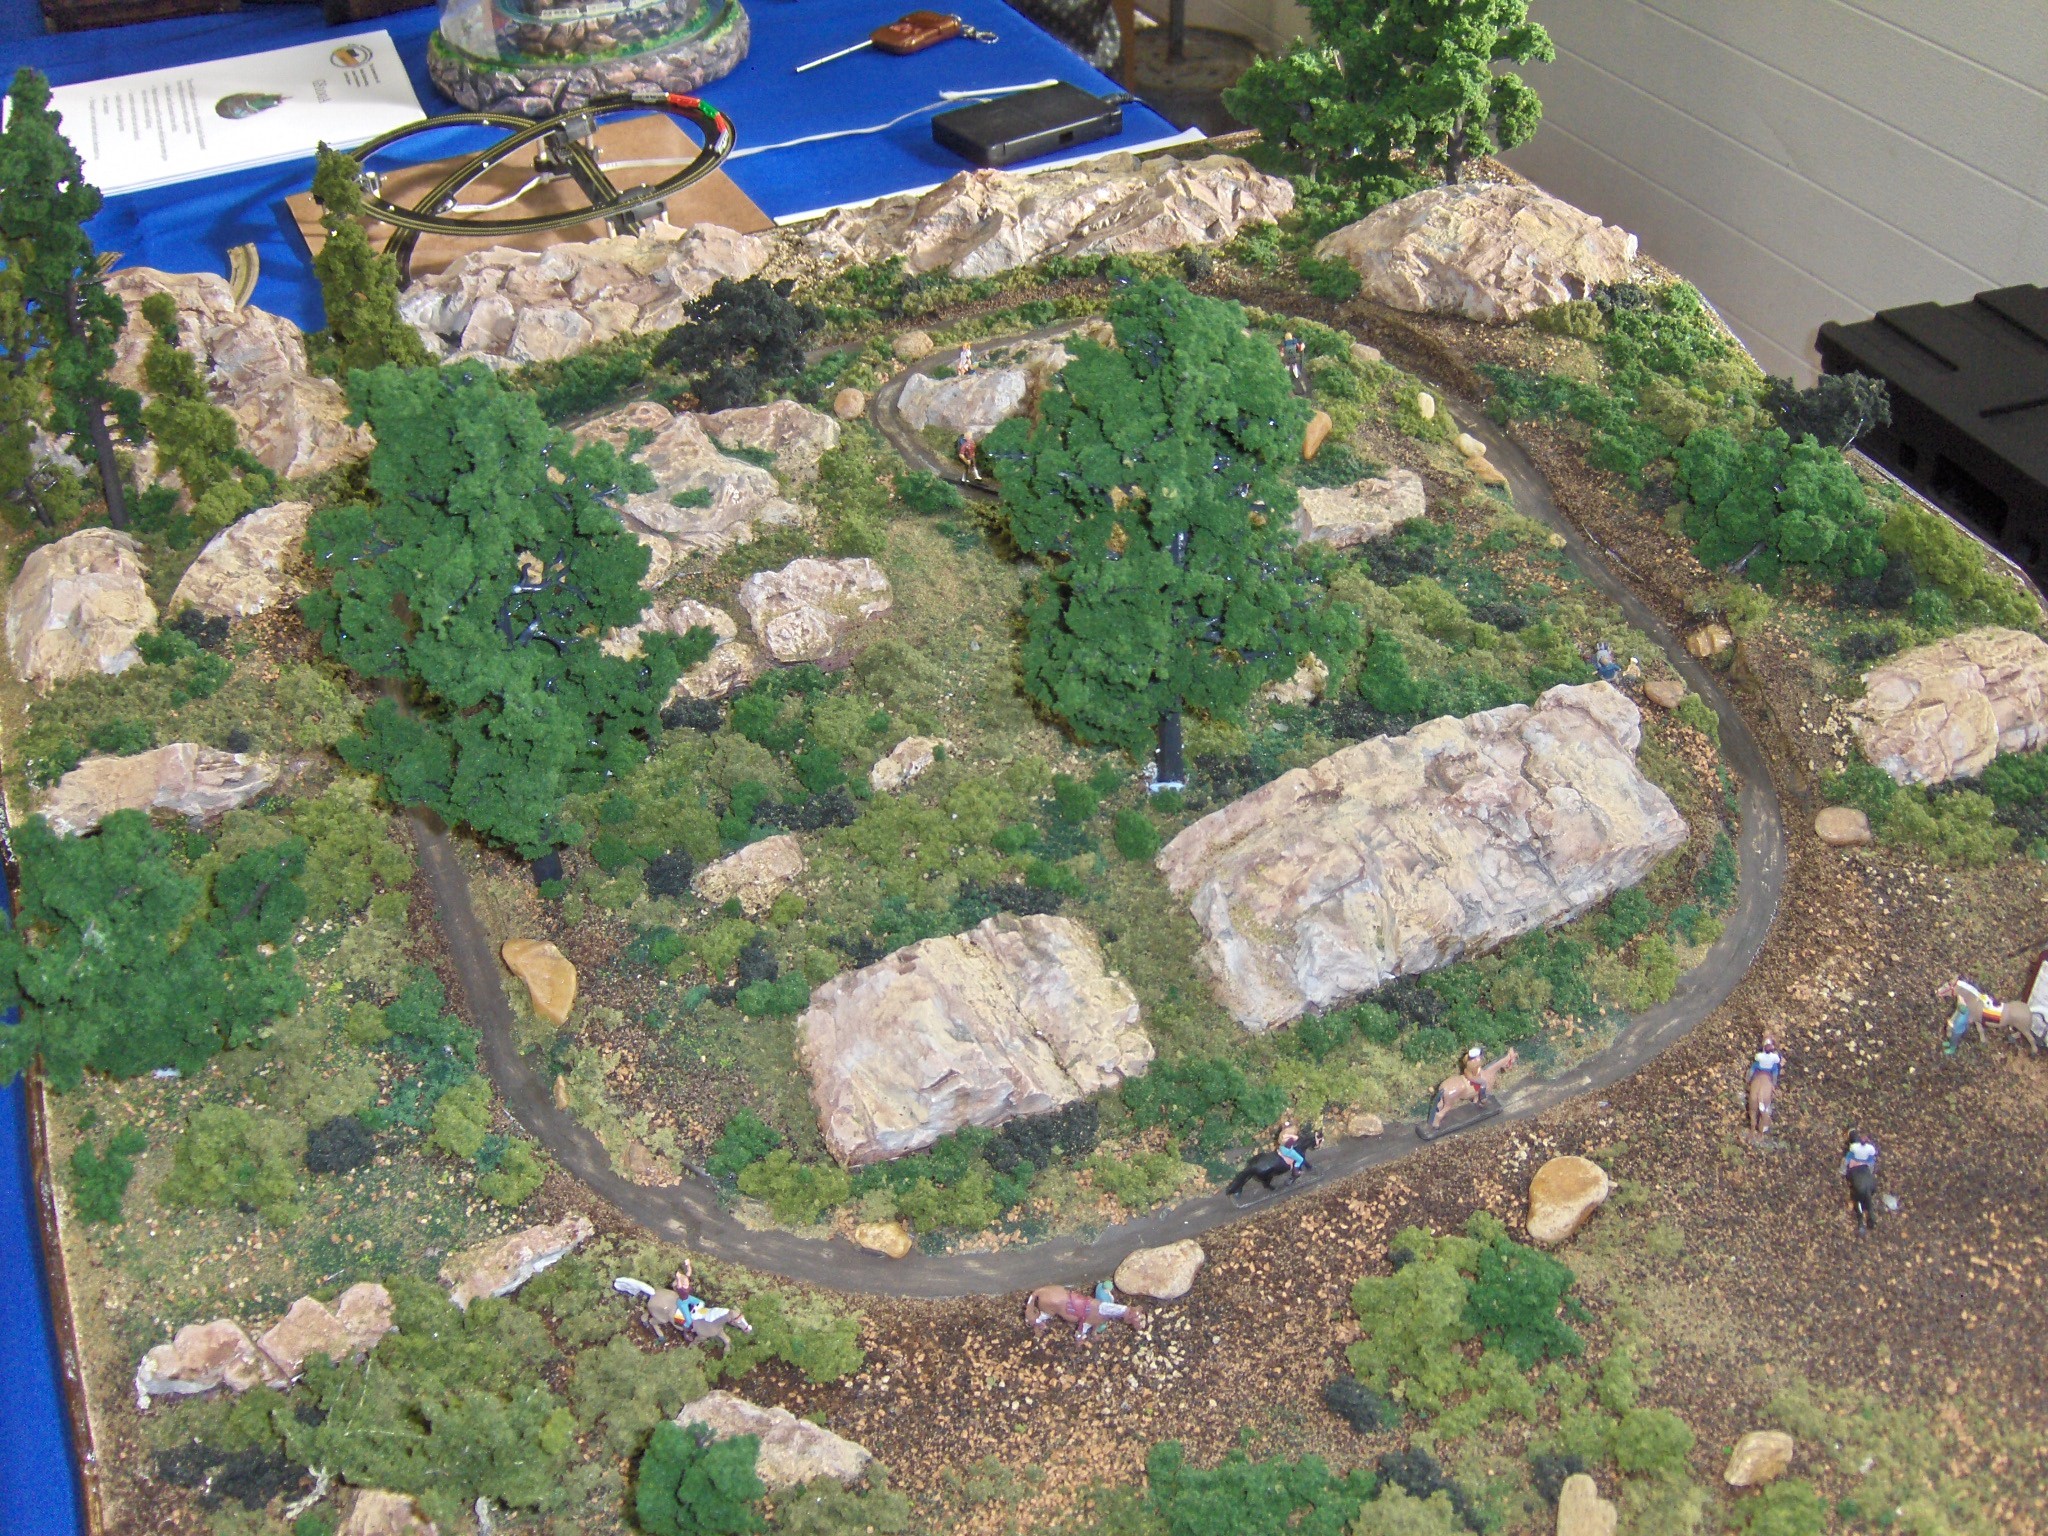 An Operations Weekend – A Different Kind of Model Railroad Eventarticle featured image thumbnail.